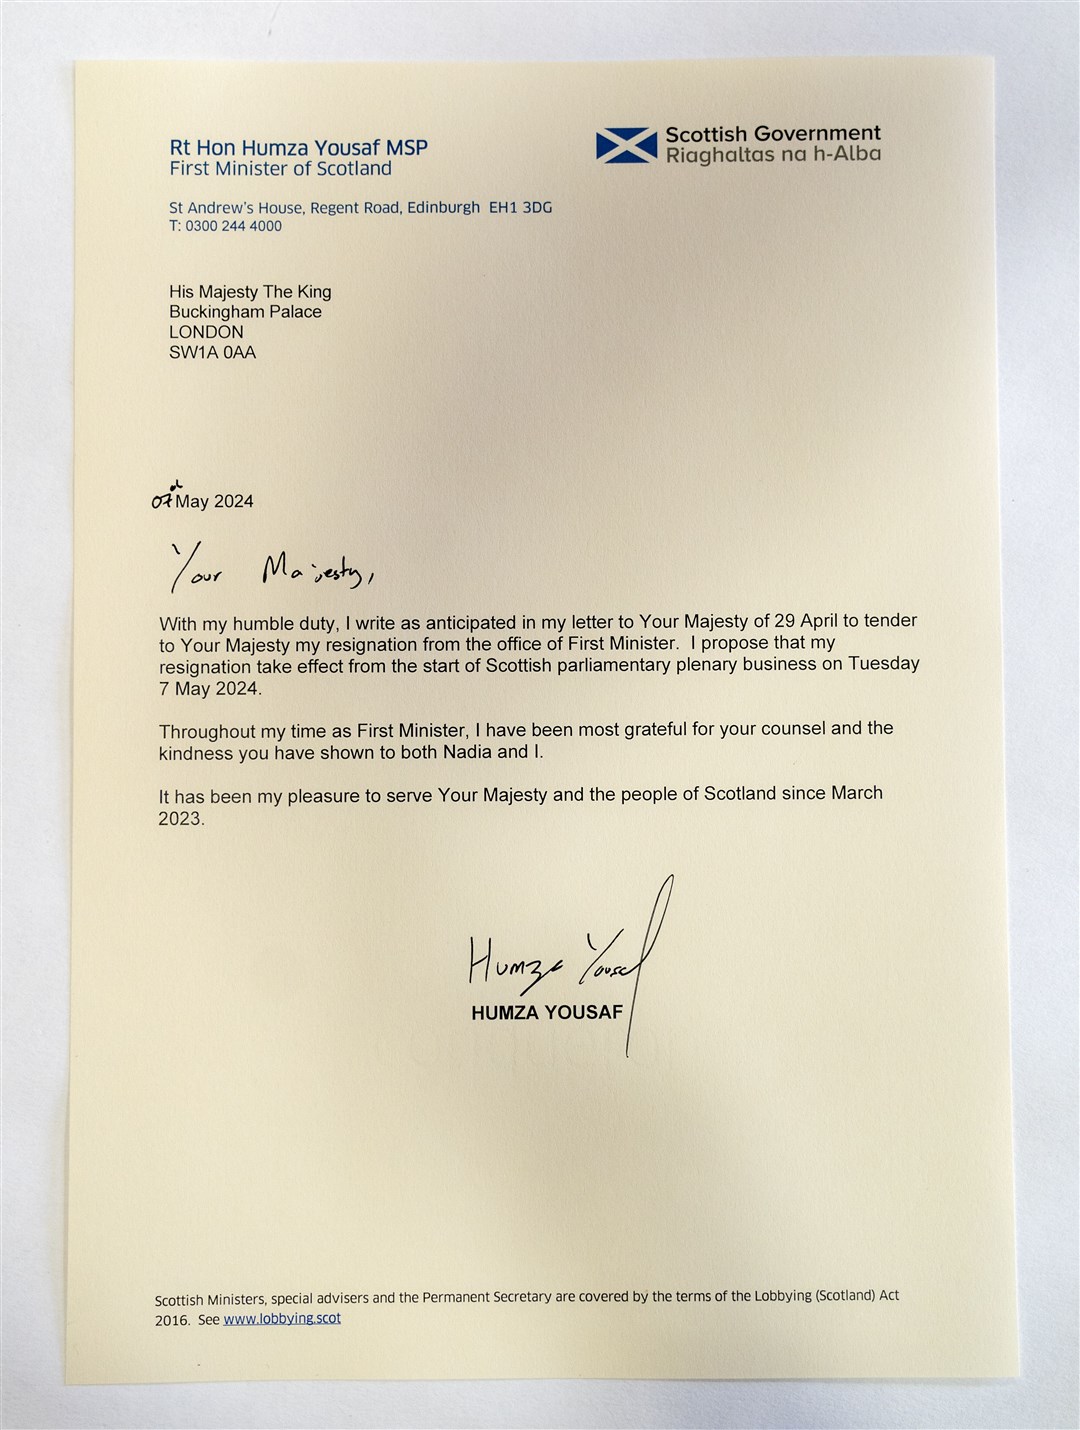 Official resignation letter to King Charles from Humza Yousaf (Jane Barlow/PA)